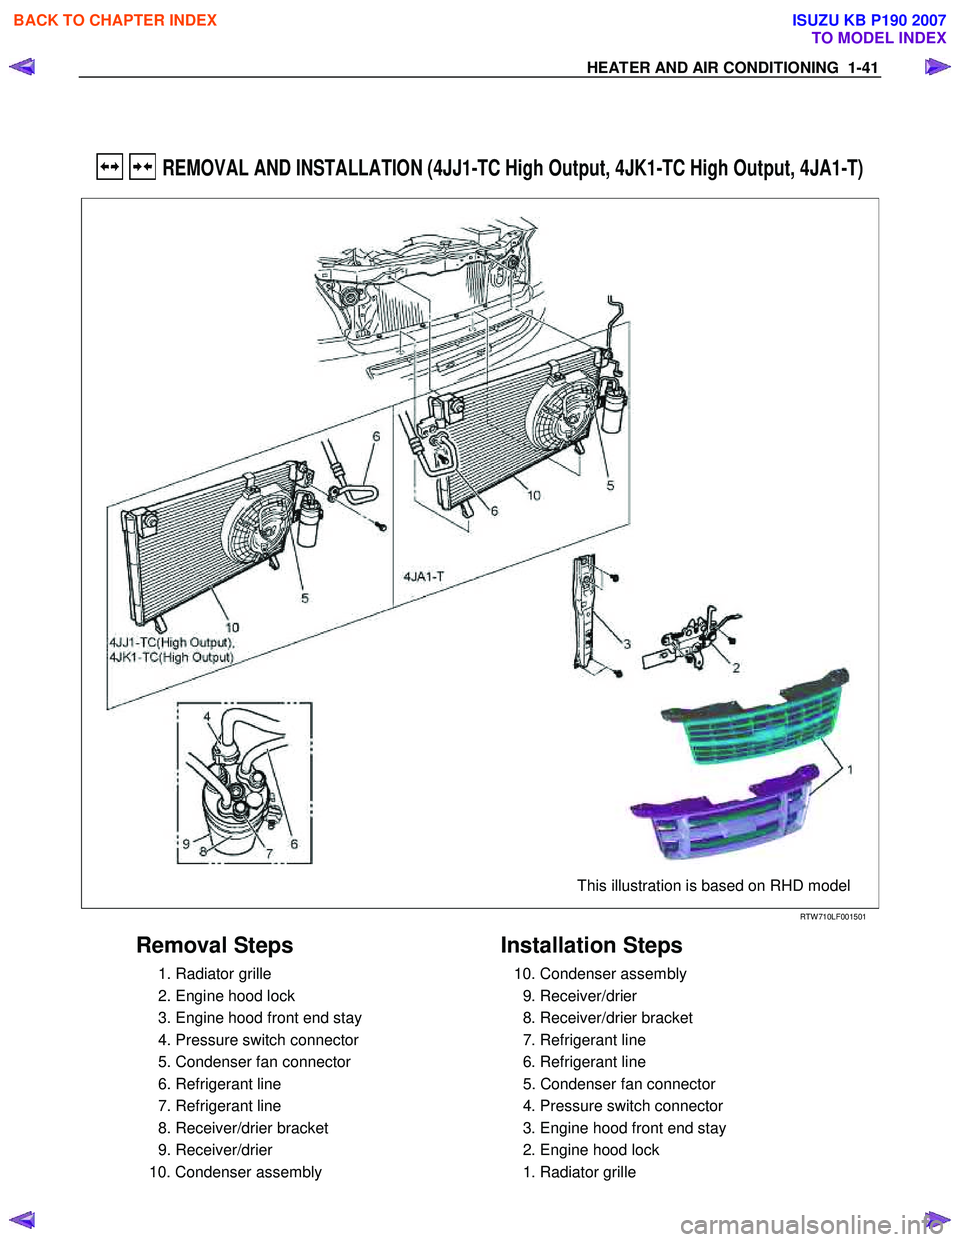 ISUZU KB P190 2007  Workshop Service Manual HEATER AND AIR CONDITIONING  1-41 
 
  REMOVAL AND INSTALLATION (4JJ1-TC High Output, 4JK1-TC High Output, 4JA1-T) 
  
 
 
 
This illustration is based on RHD model
 
 
RTW 710LF001501 
 
Removal Step